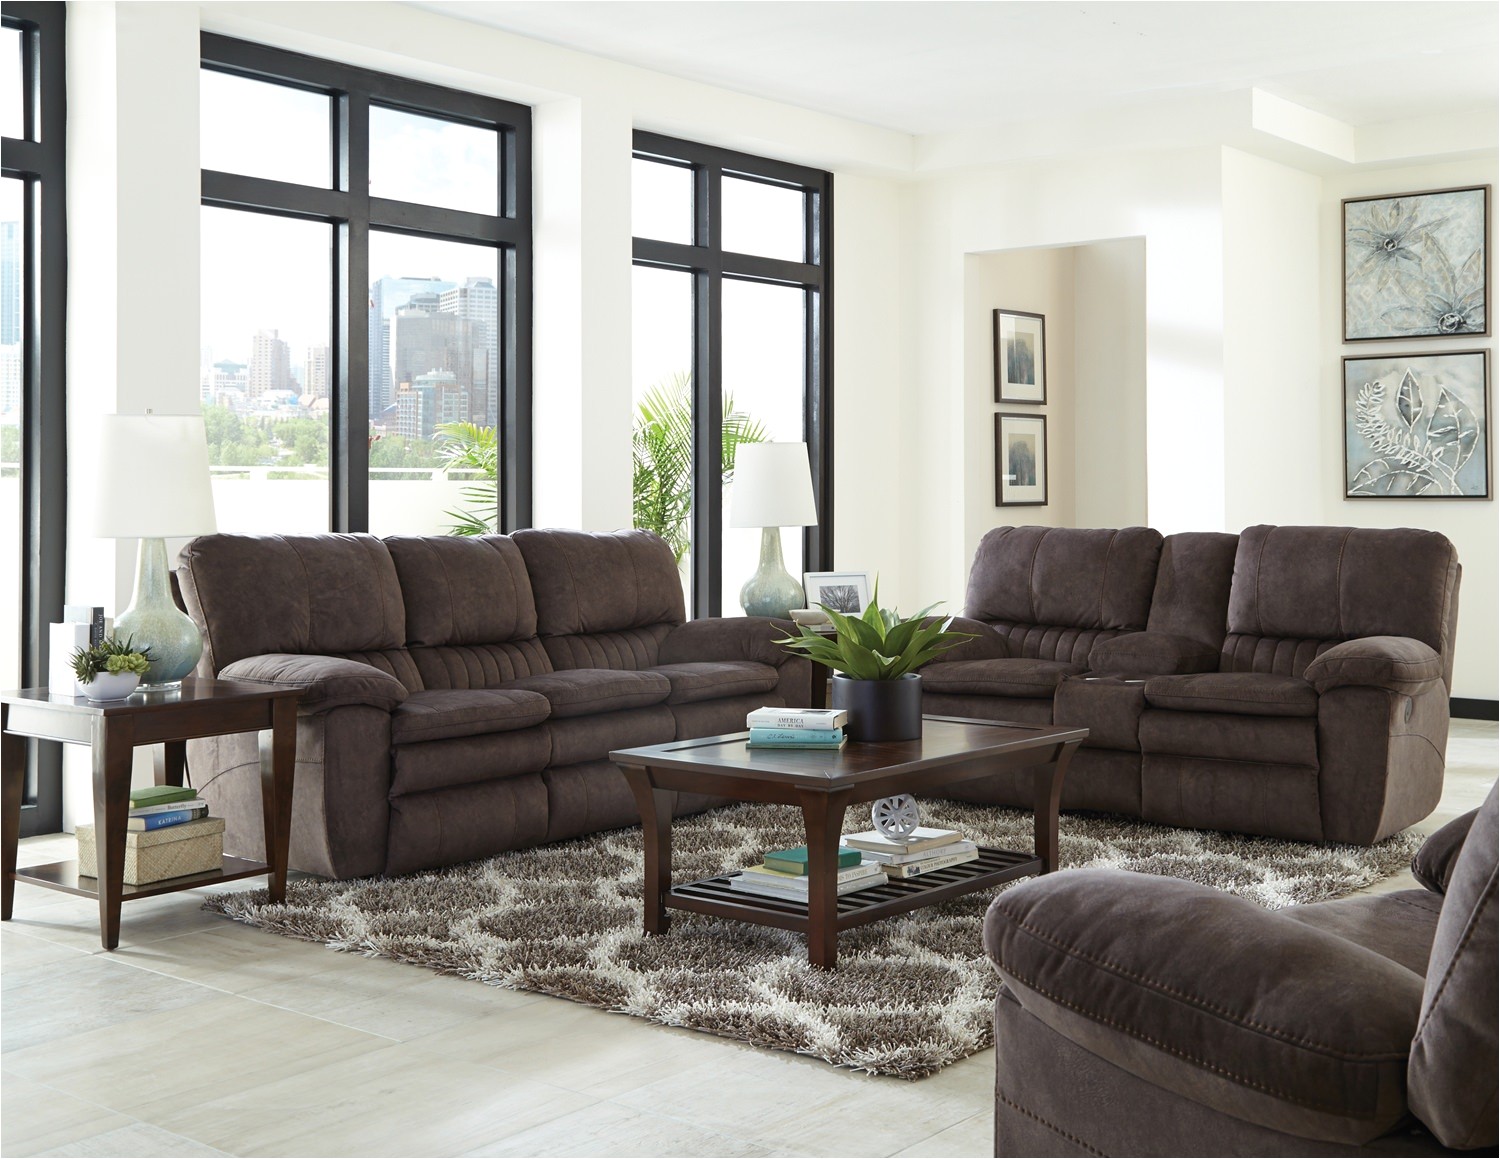 Early American Furniture sofas Reyes Chocolate Lay Flat Reclining Group